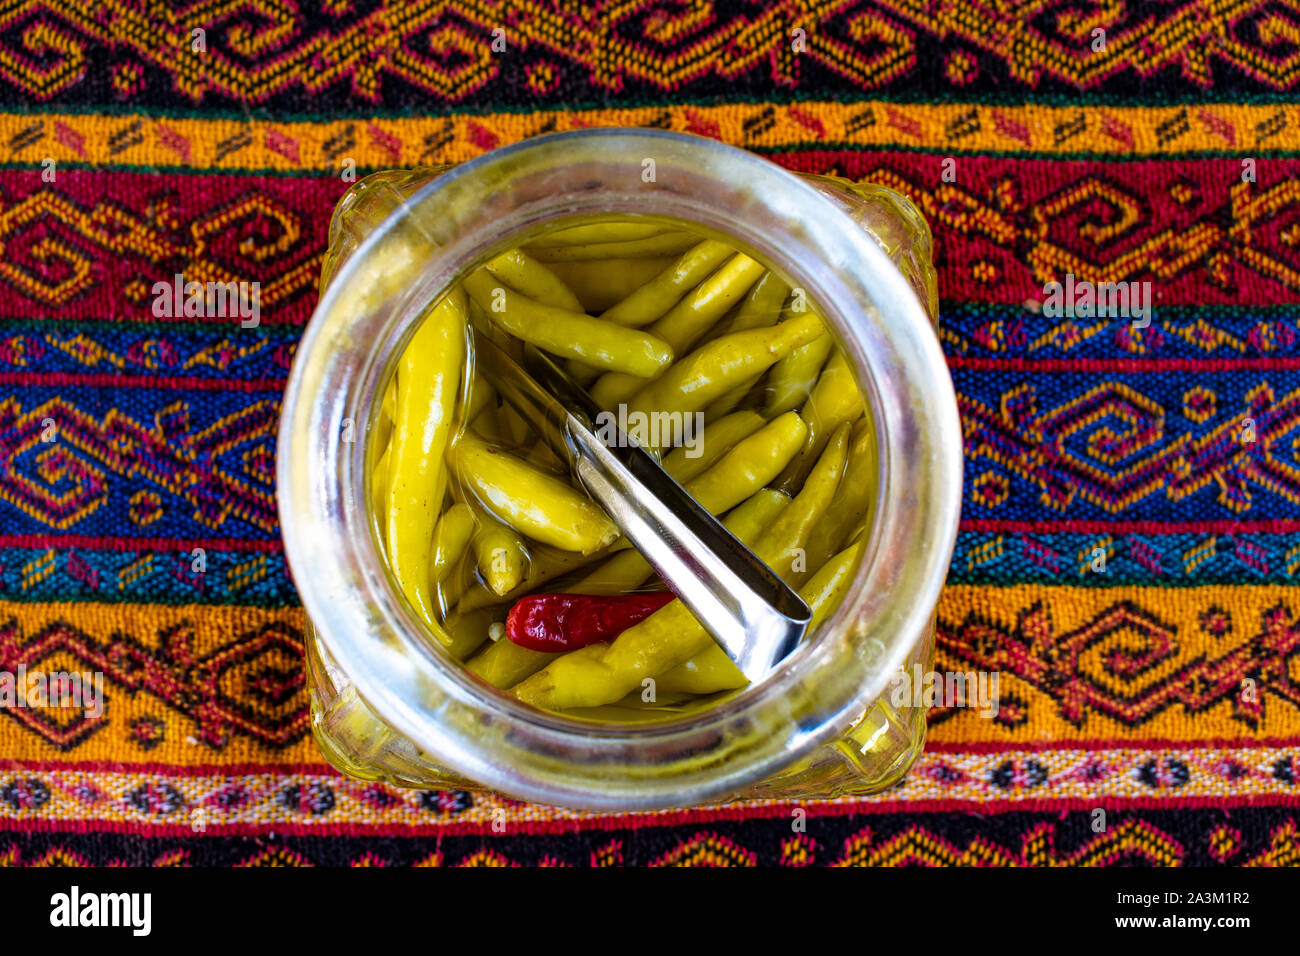 Istanbul, Turkey: Middle Eastern food and lifestyle, a jar of spicy green chillies and hot pepper on a damask tablecloth Stock Photo